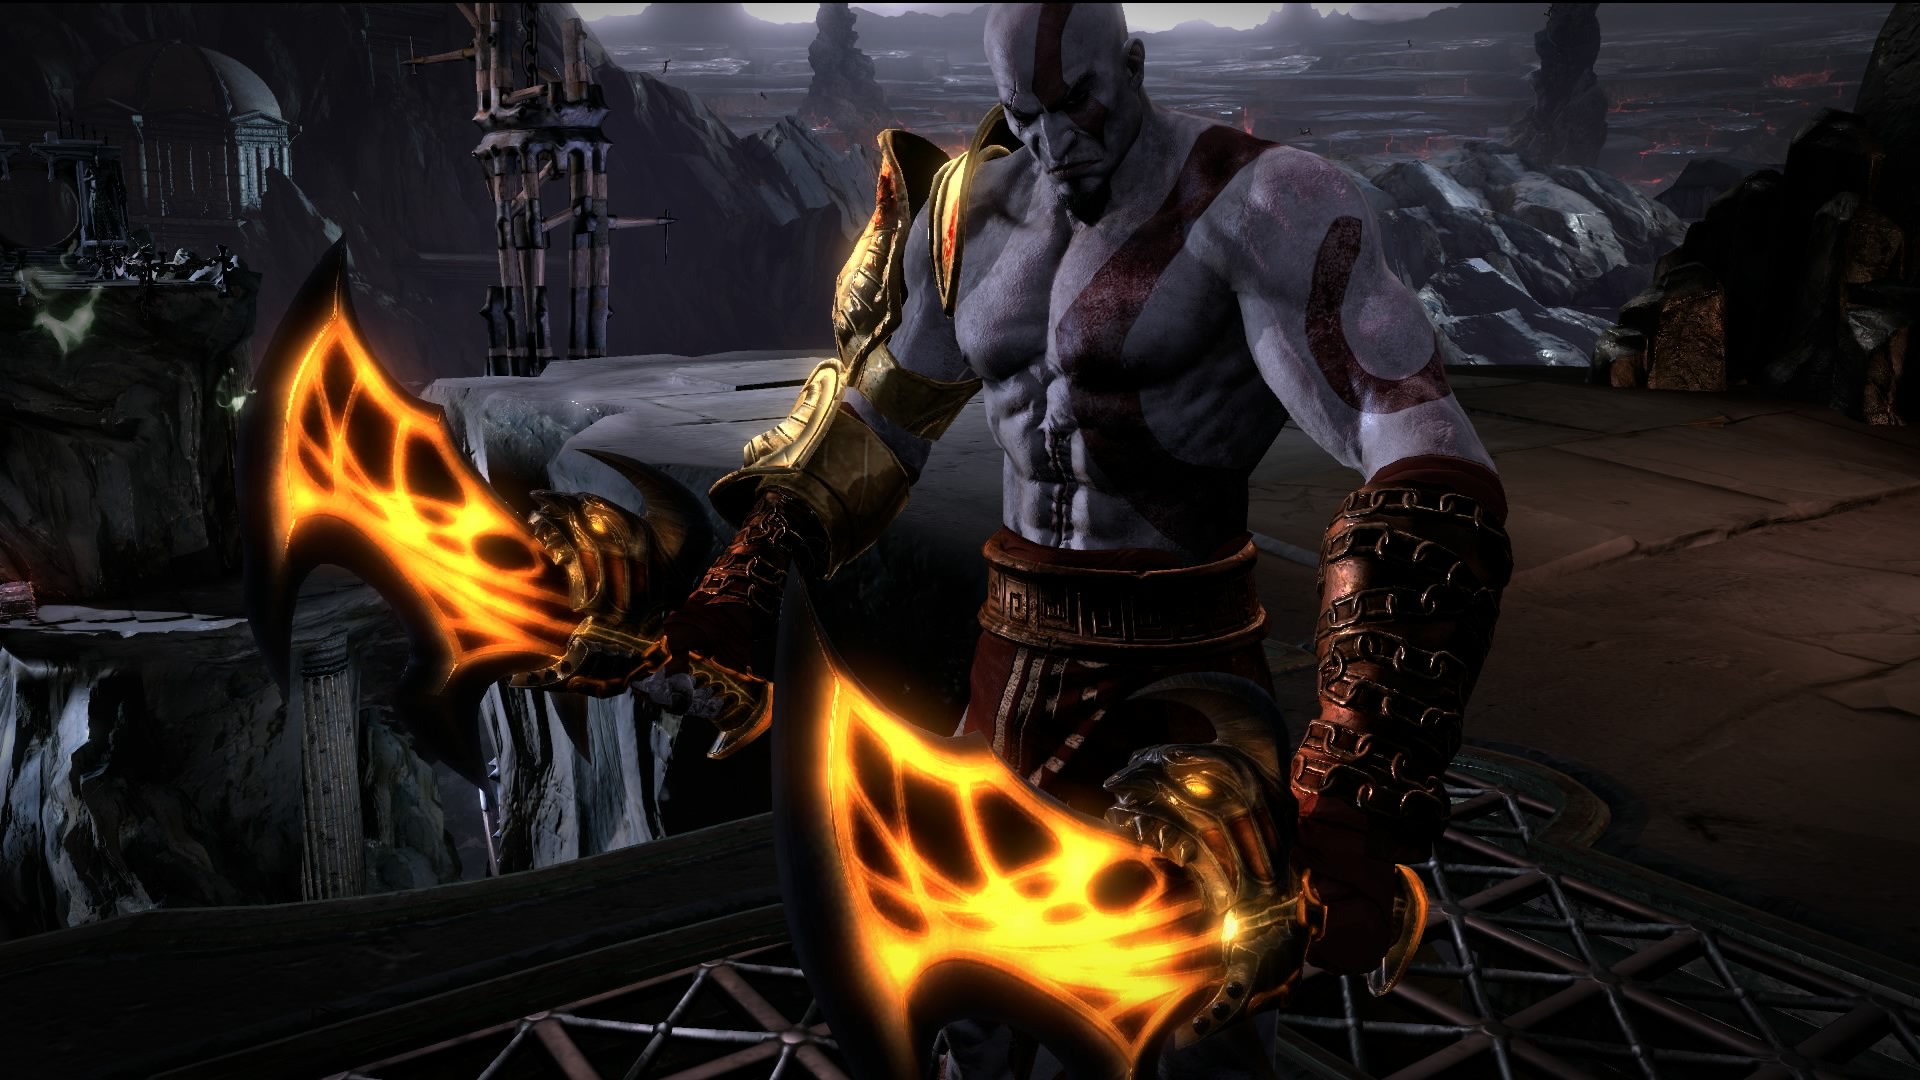 God of War III Remastered: Worth Upgrading? | Tom's Guide